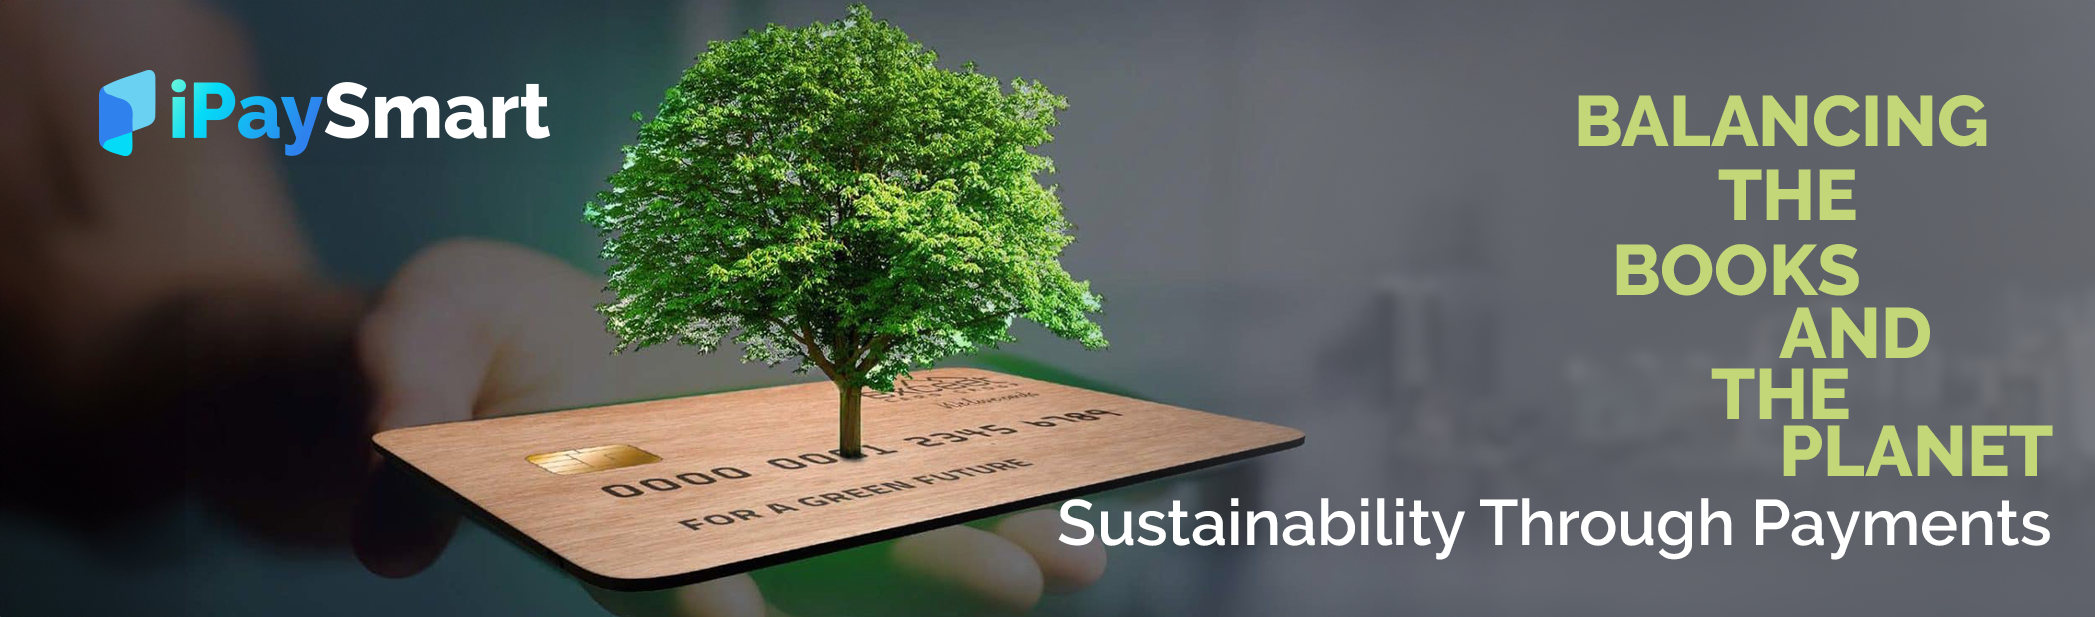 Balancing the Books and the Planet: Sustainability Through Payments